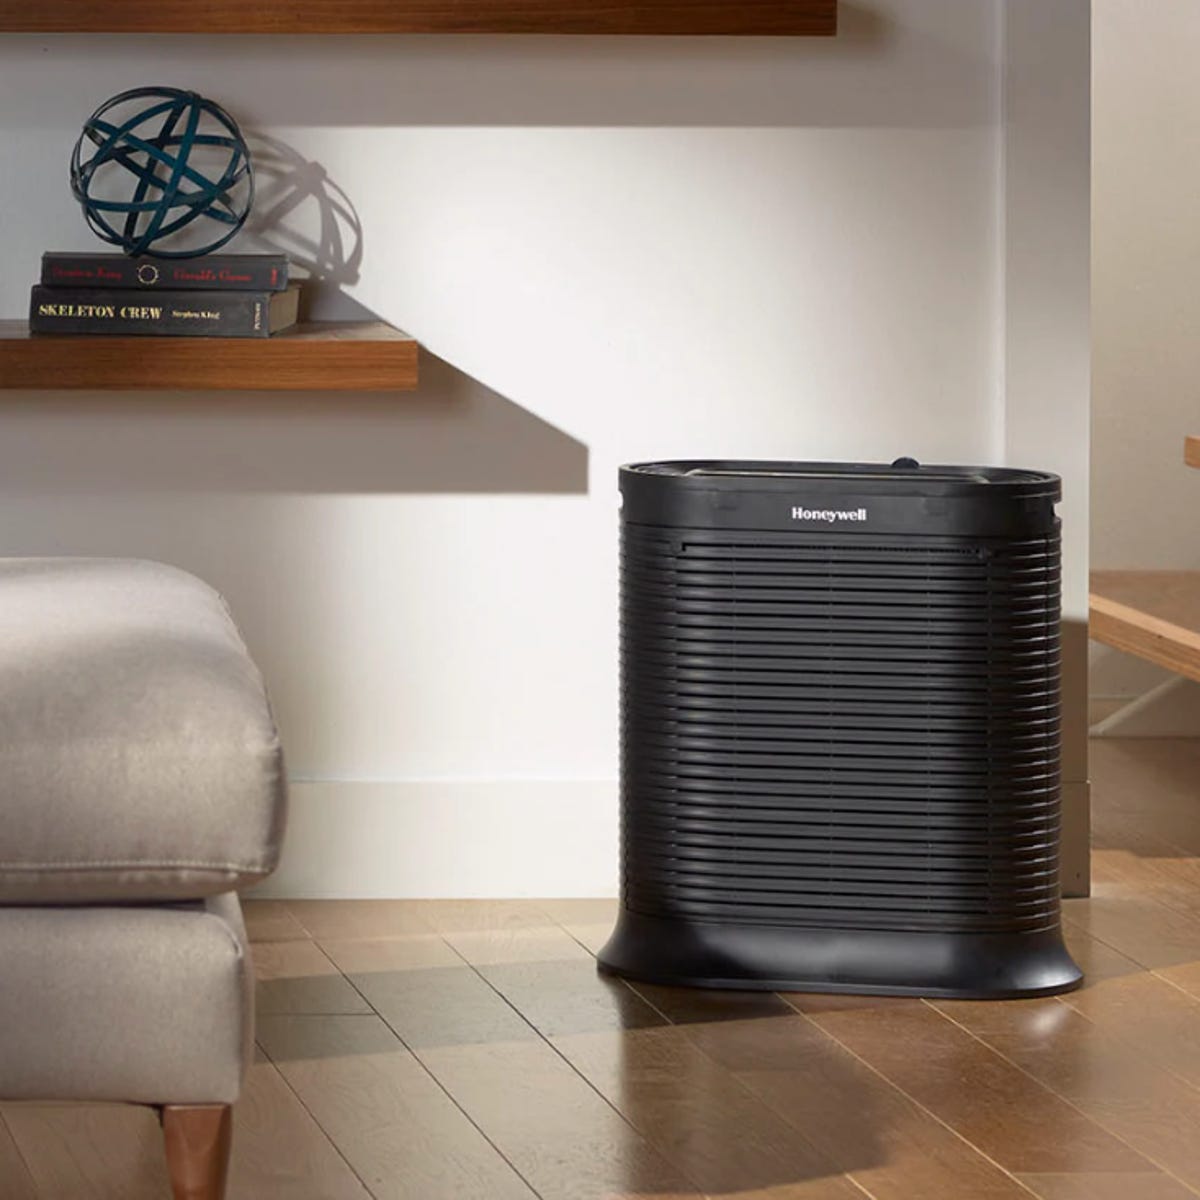 Home Dust Collector Air Purifier. 6 Advantages, dust filter